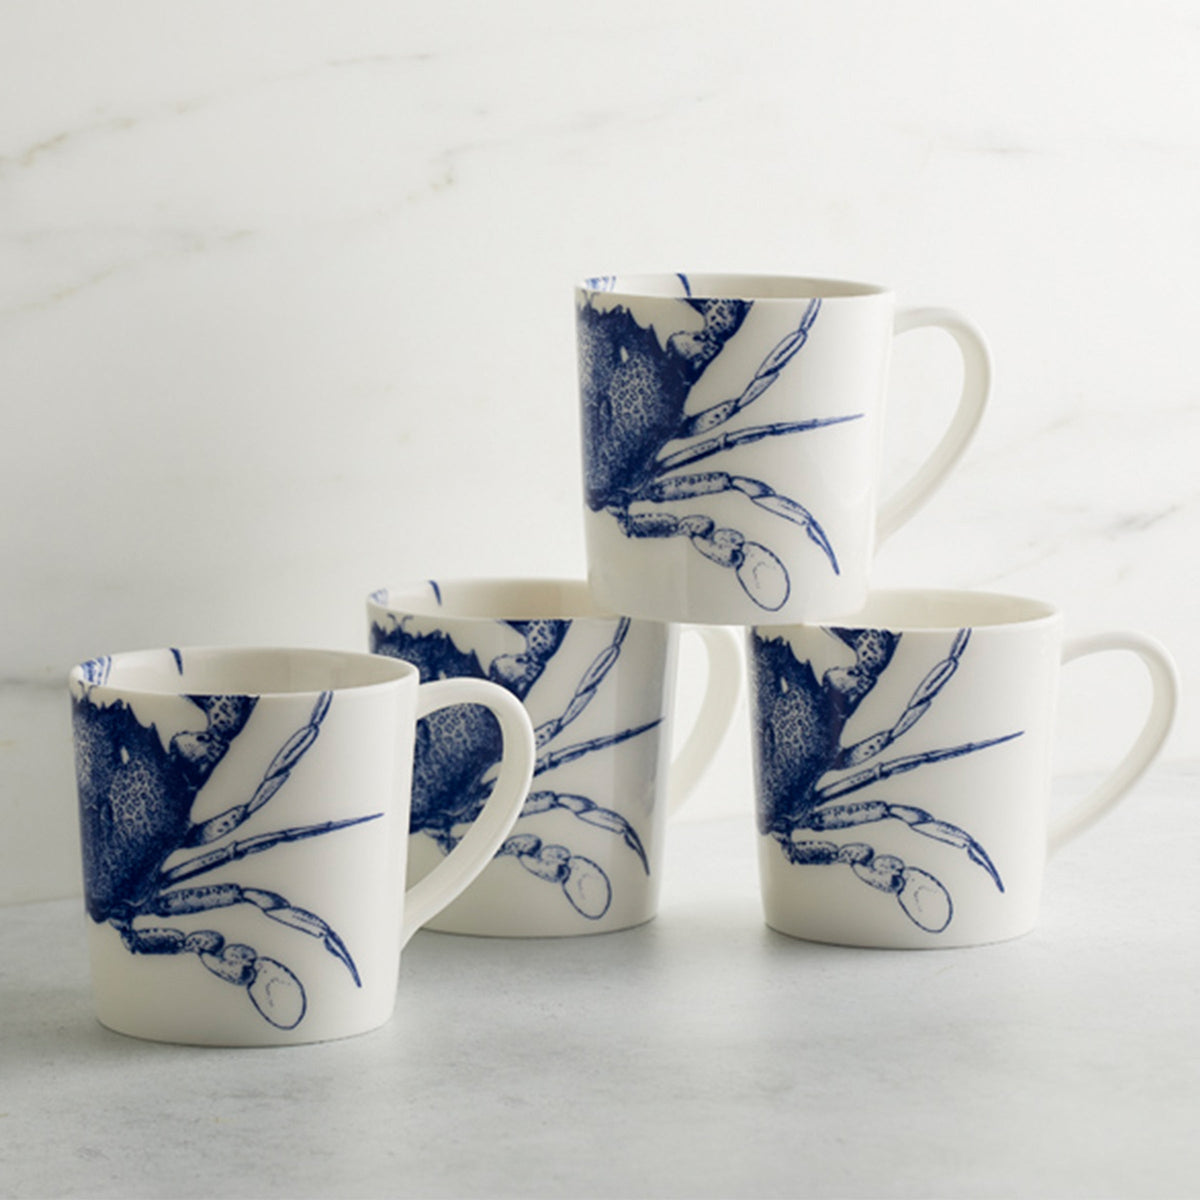 Four Caskata Artisanal Home Crab Mug Blue dishwasher-safe mugs with a coastal vibe, featuring blue and white designs reminiscent of the blue crab.